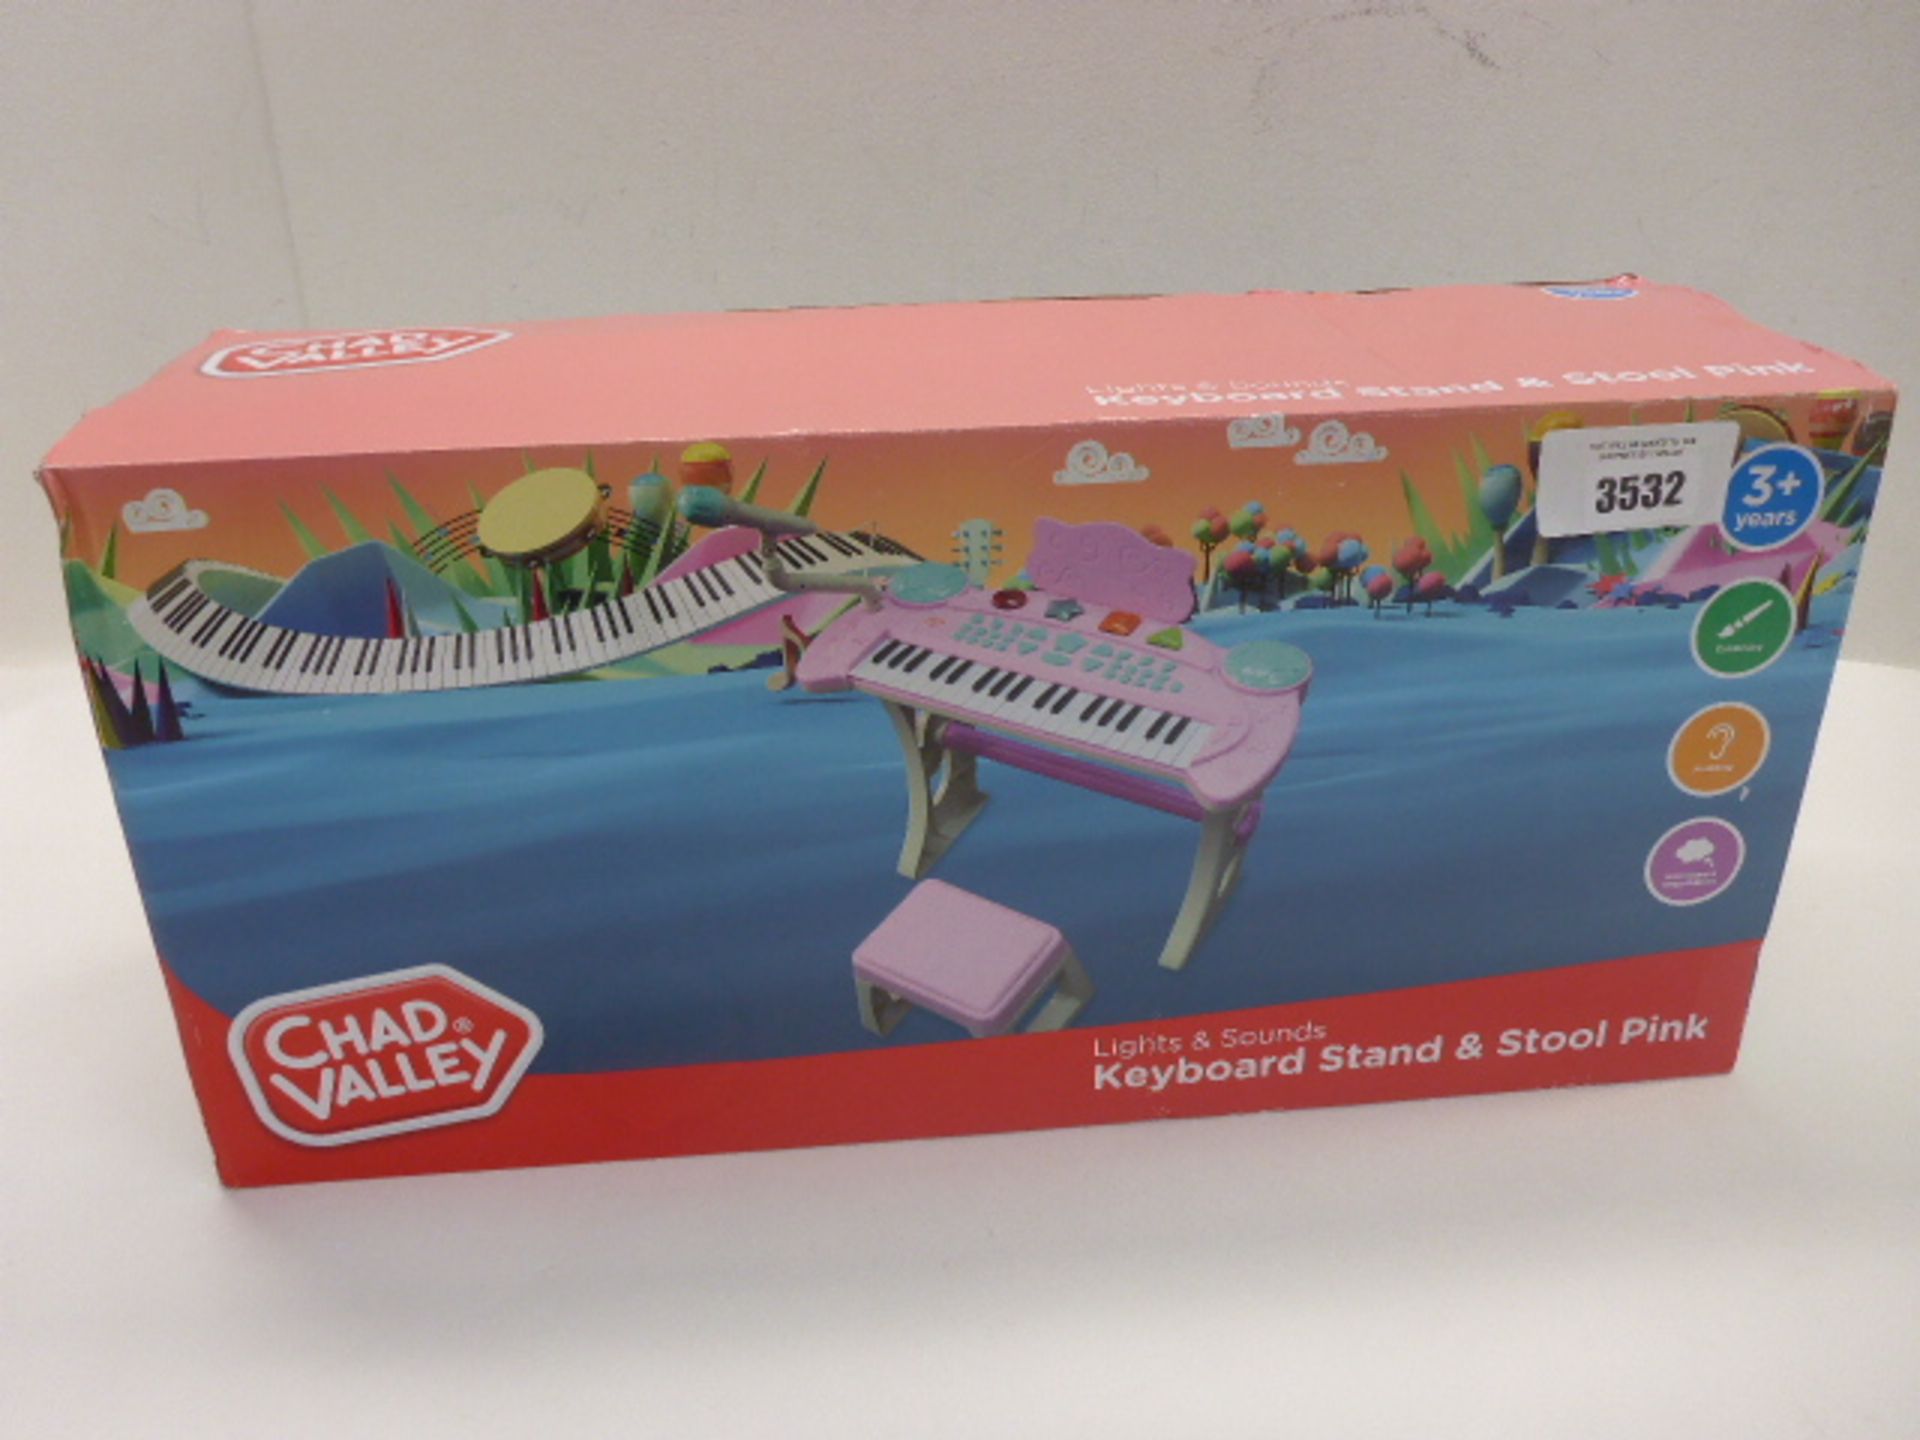 Chad Valley light & sound keyboard stand and pink stool set